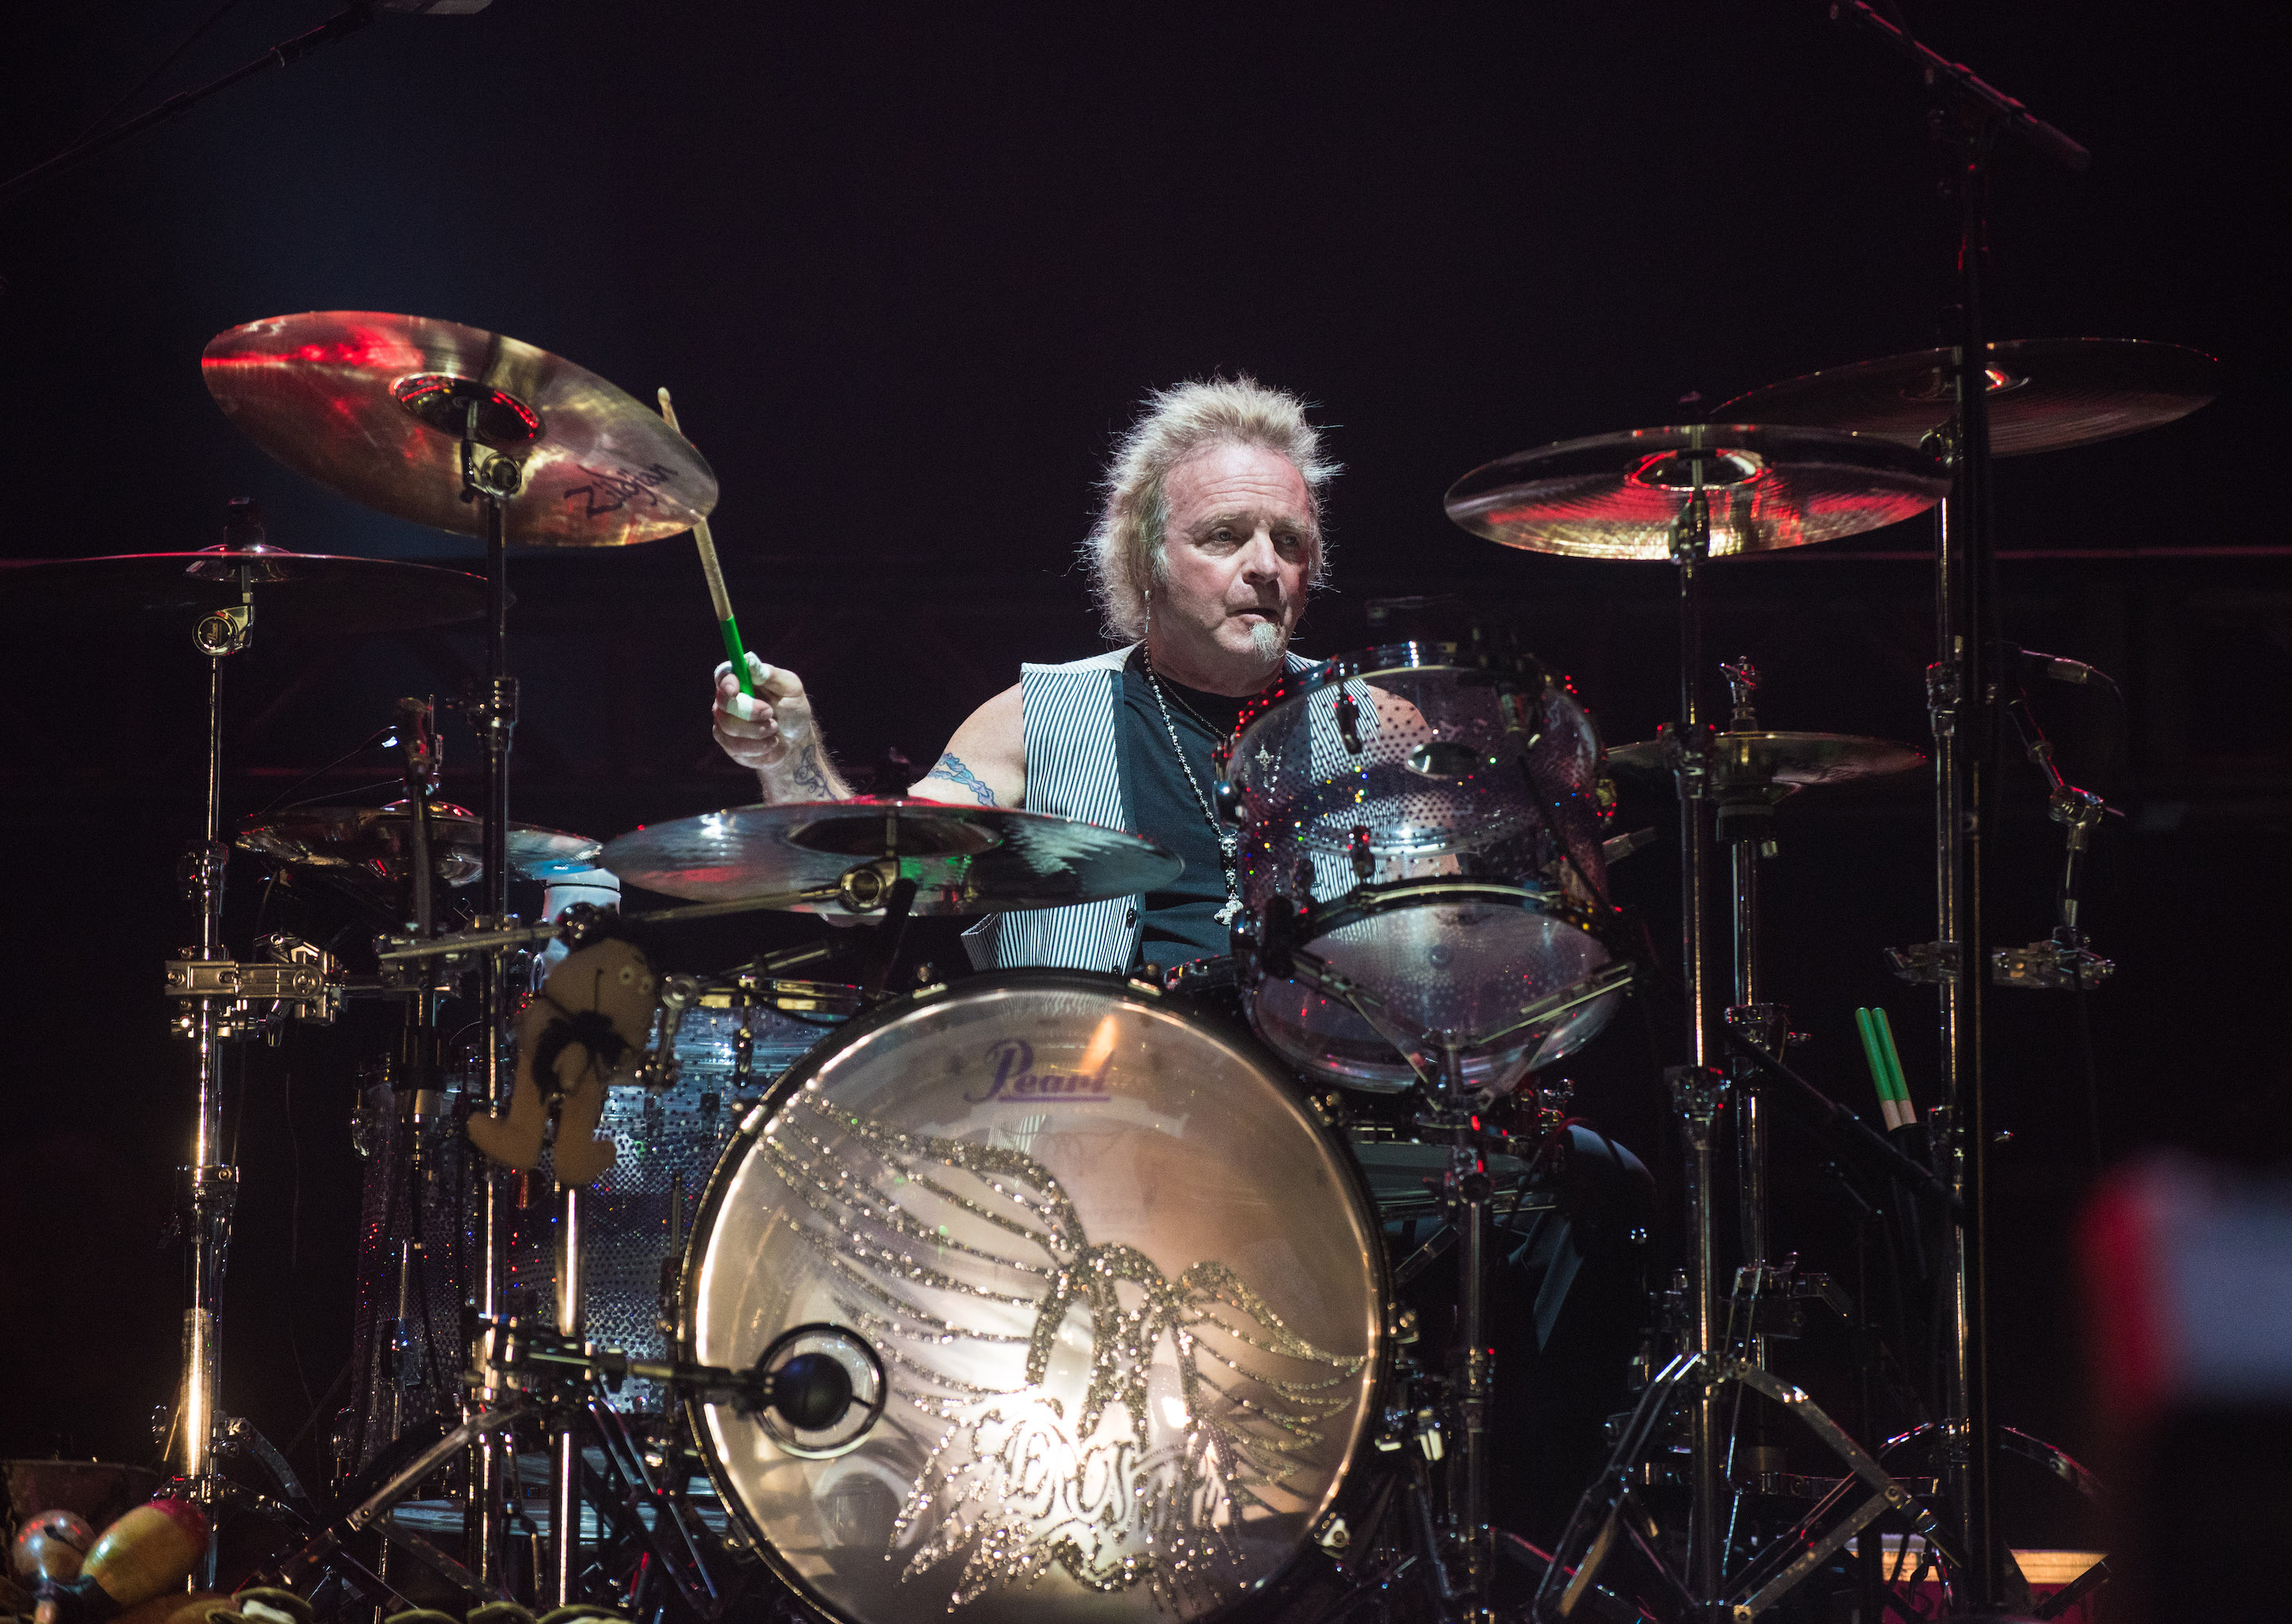 Joey Kramer's lawsuit, Quest for Grammy participation, Friction within the band, Legal turbulence, 2880x2050 HD Desktop